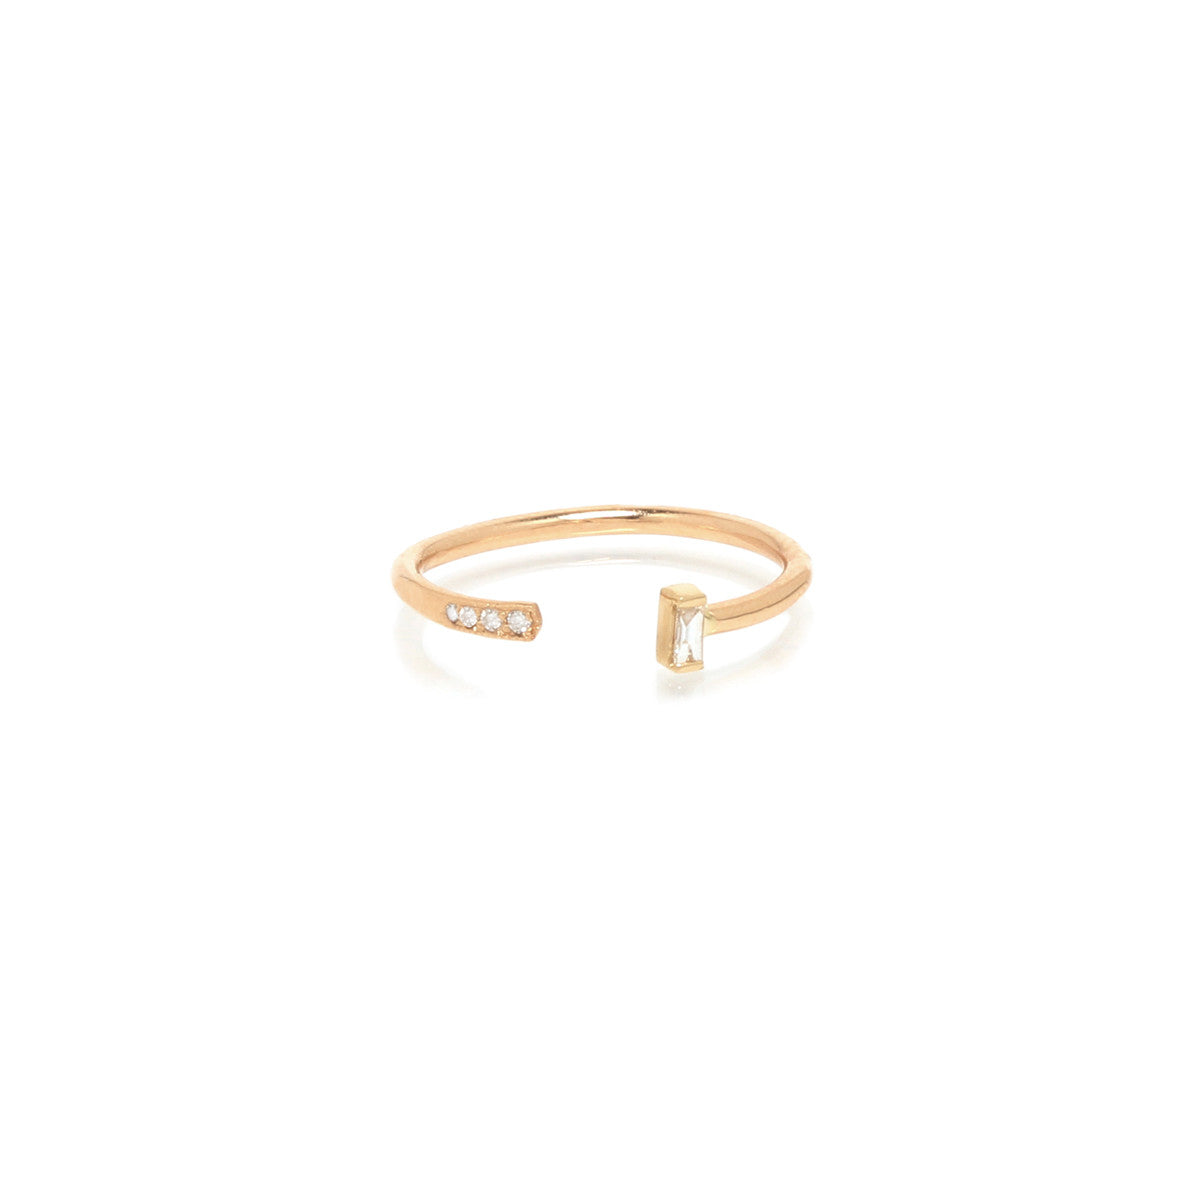 Zoë Chicco – 14k open pave and baguette ring